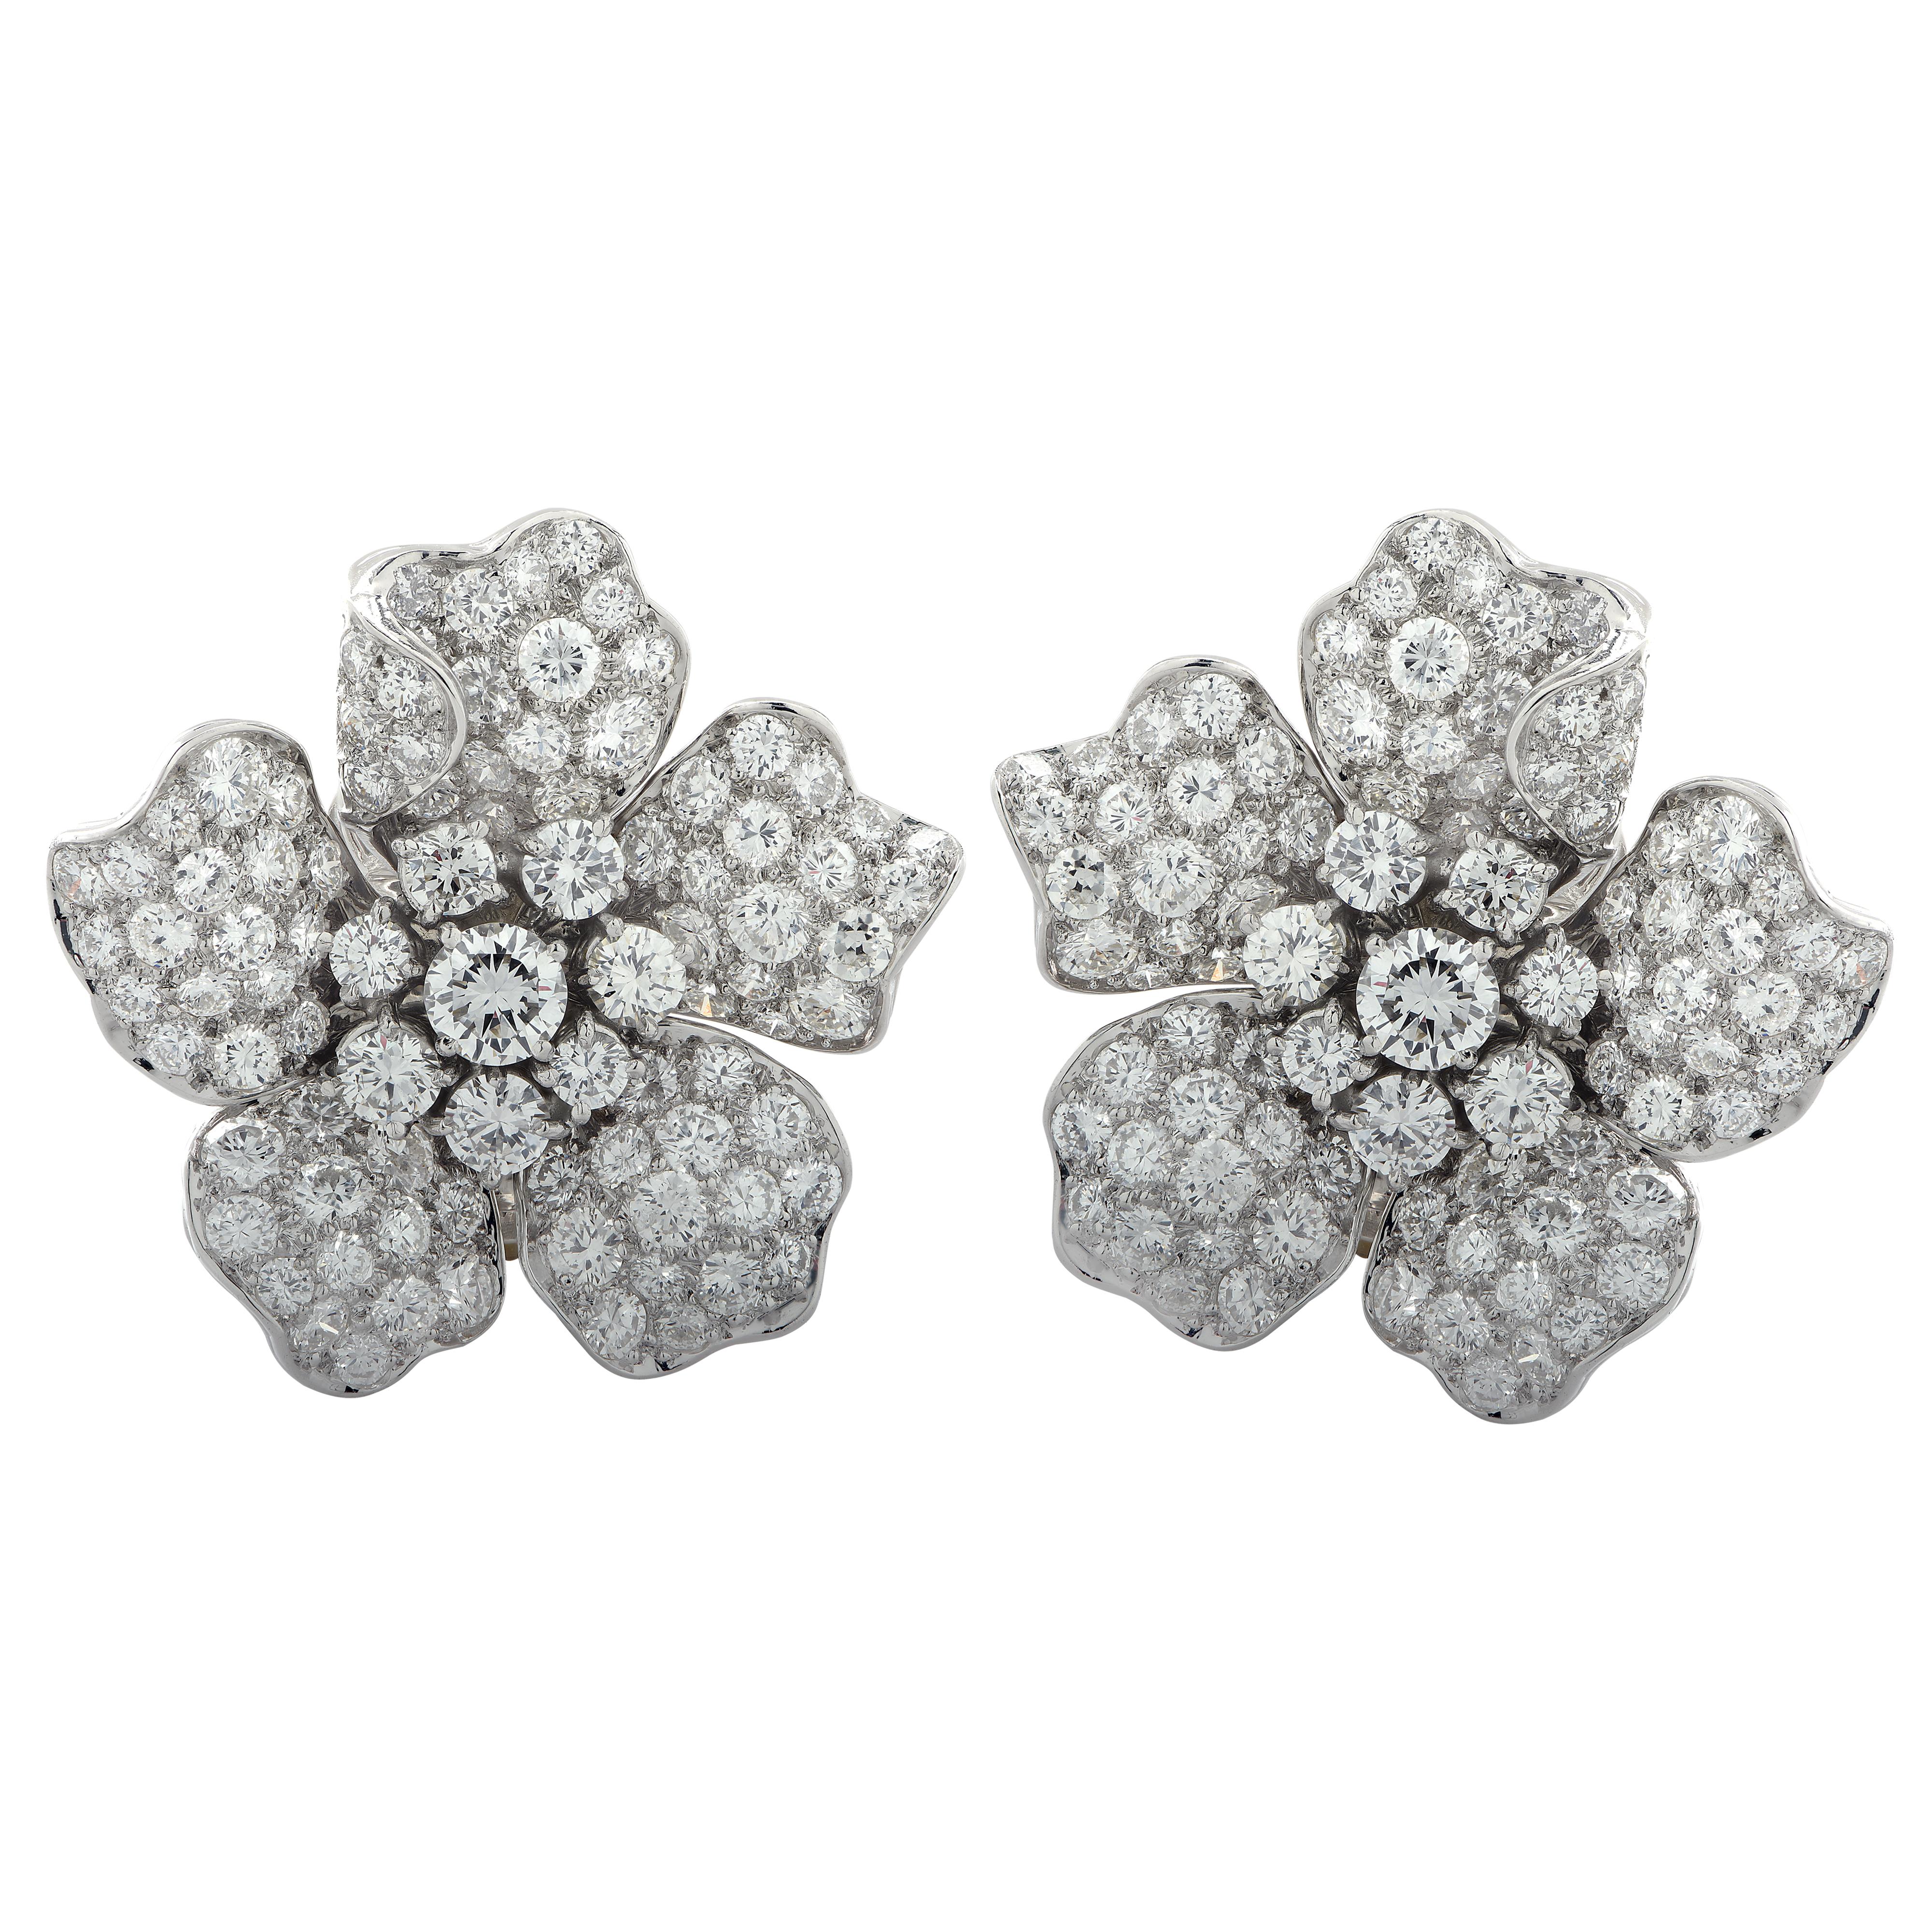 Glorious mid-century flower earrings crafted in platinum, featuring 182 round brilliant cut diamonds weighing approximately 10 carats total, G color, VS clarity. Finely crafted diamond encrusted petals are delicately arranged around diamond centers